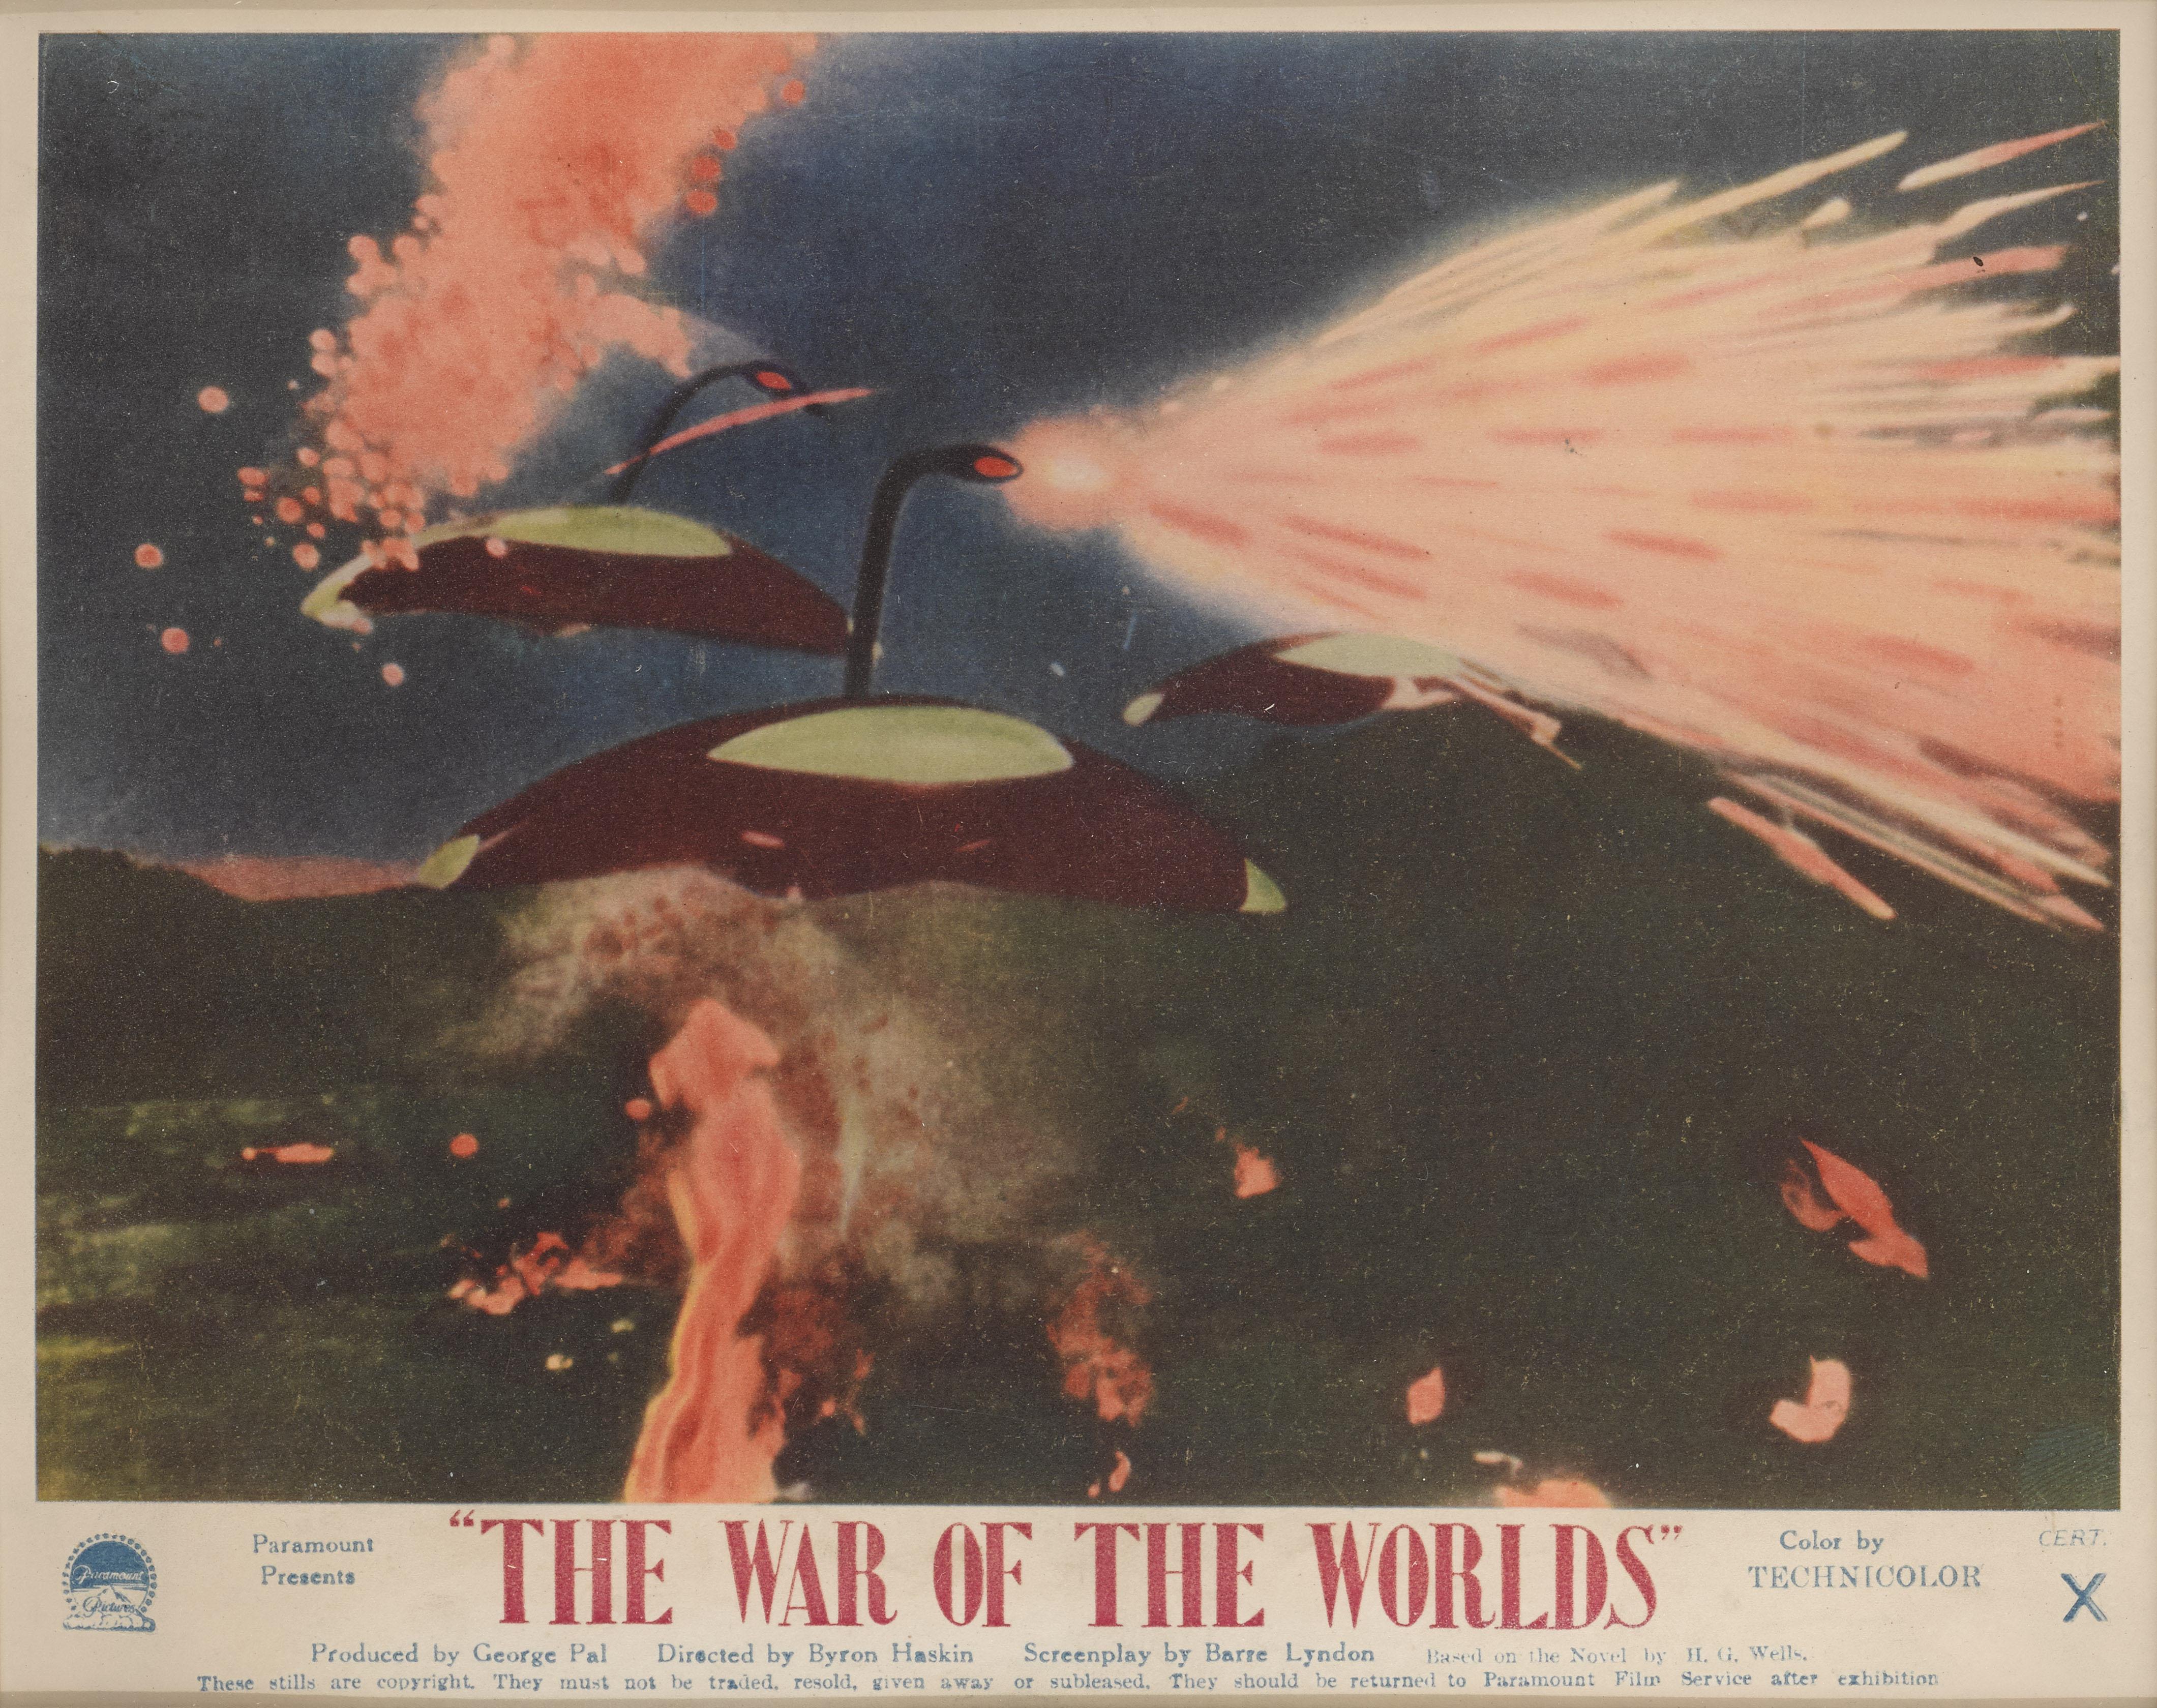 Original British front of house card for The War of the Worlds 1953 it was used inside the foyer of the cinema.
This artwork featuring the invading spacecraft is the best card from the set of 8.
The film is one of the most famous science fiction